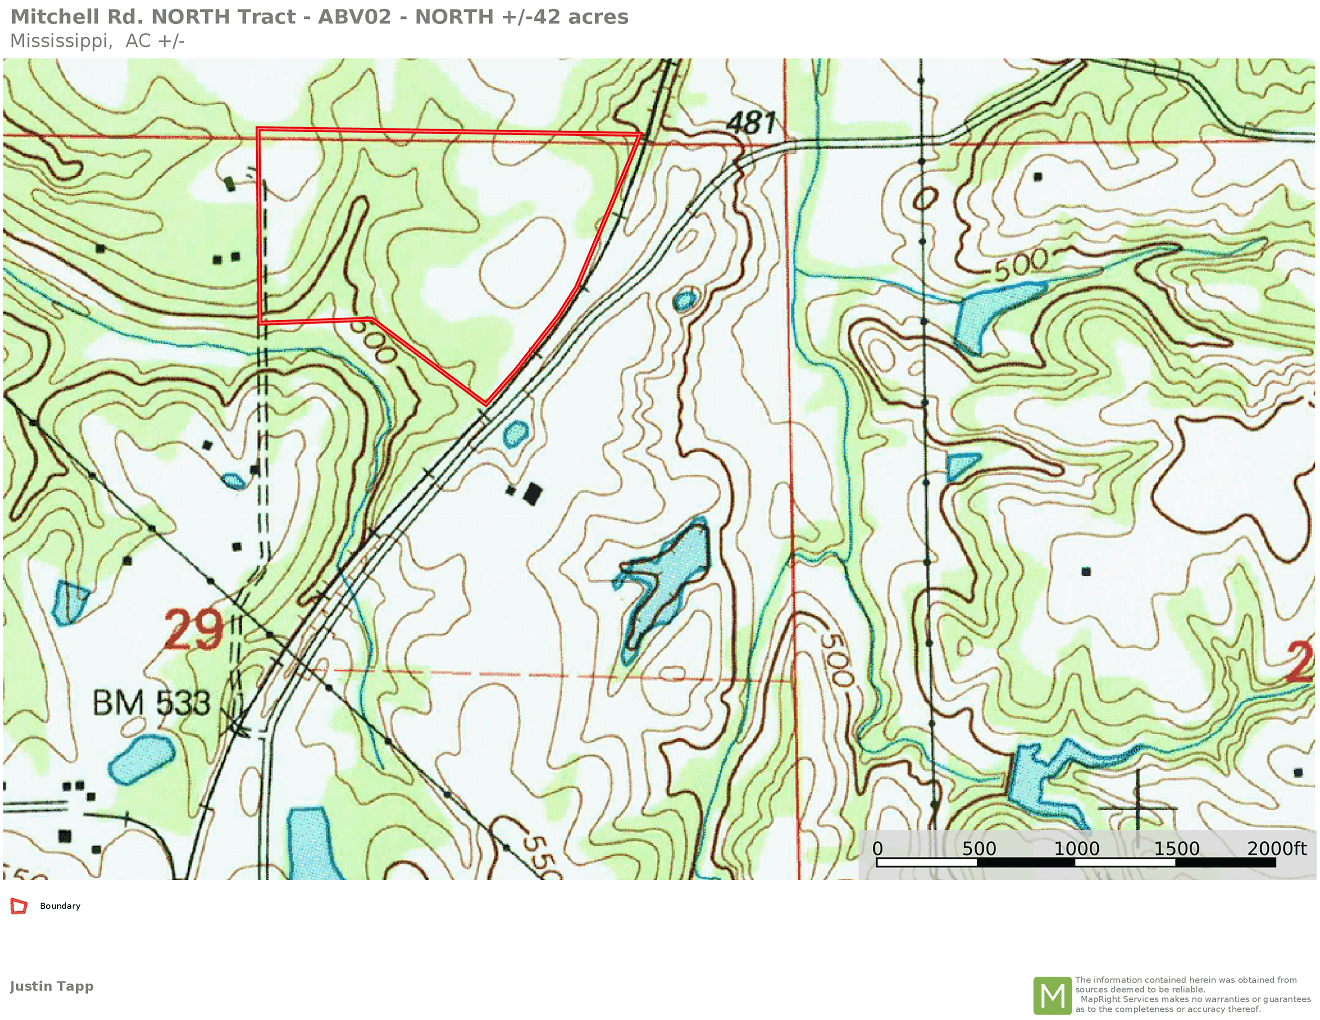 14 Topo Map ABV02 NORTH 42 acres.png